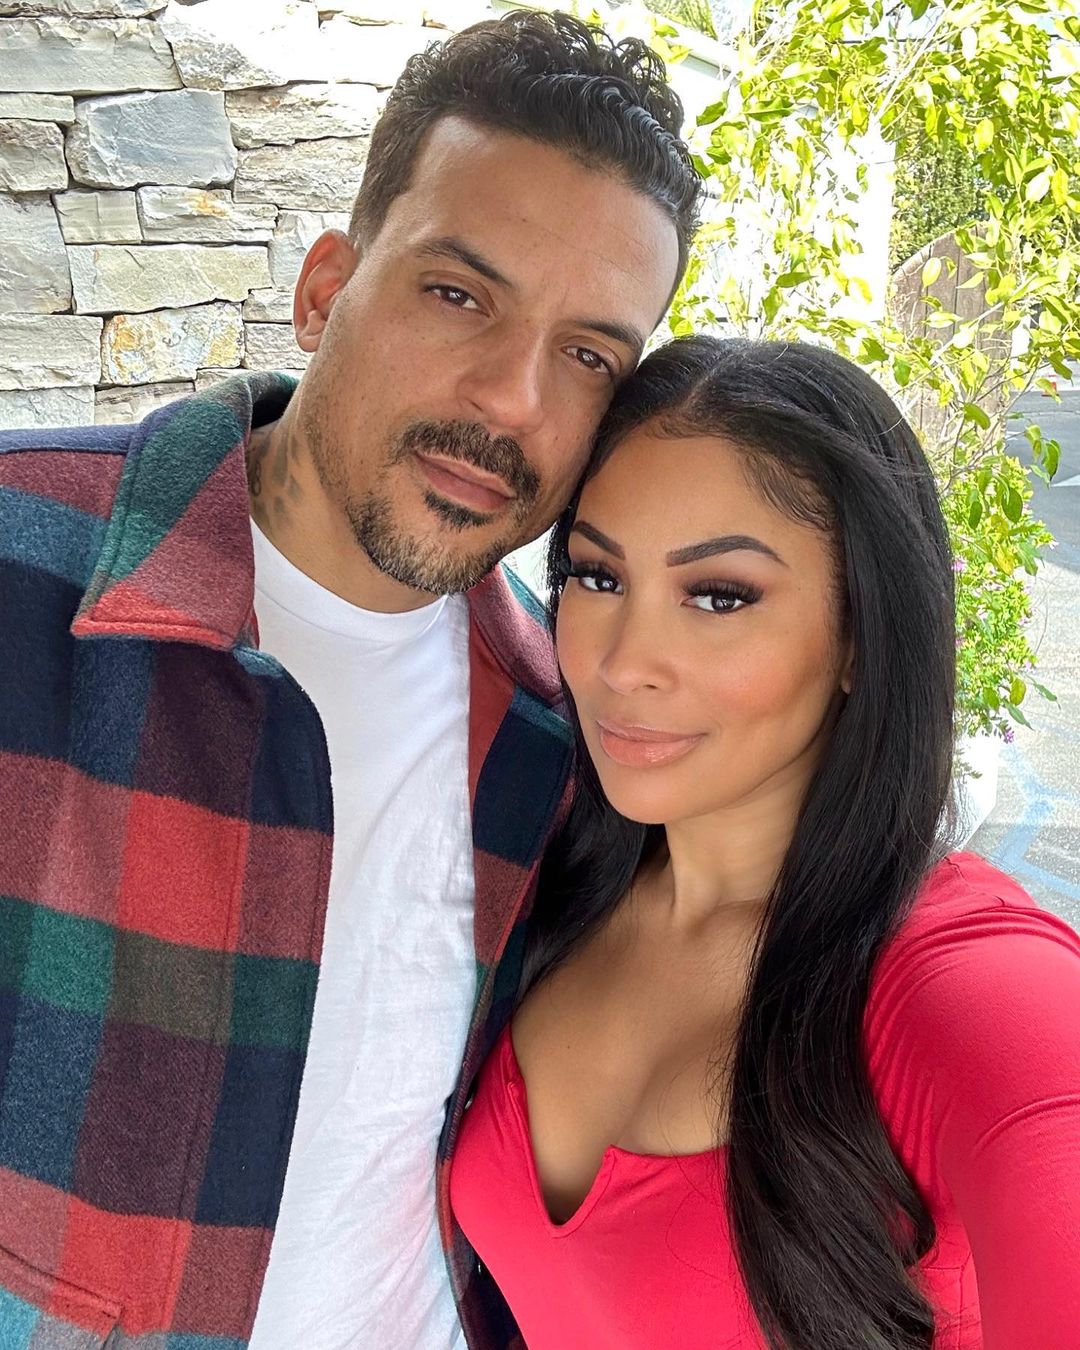 Former NBA Player Matt Barnes With His Soon-To-Be Wife Anansa Sims